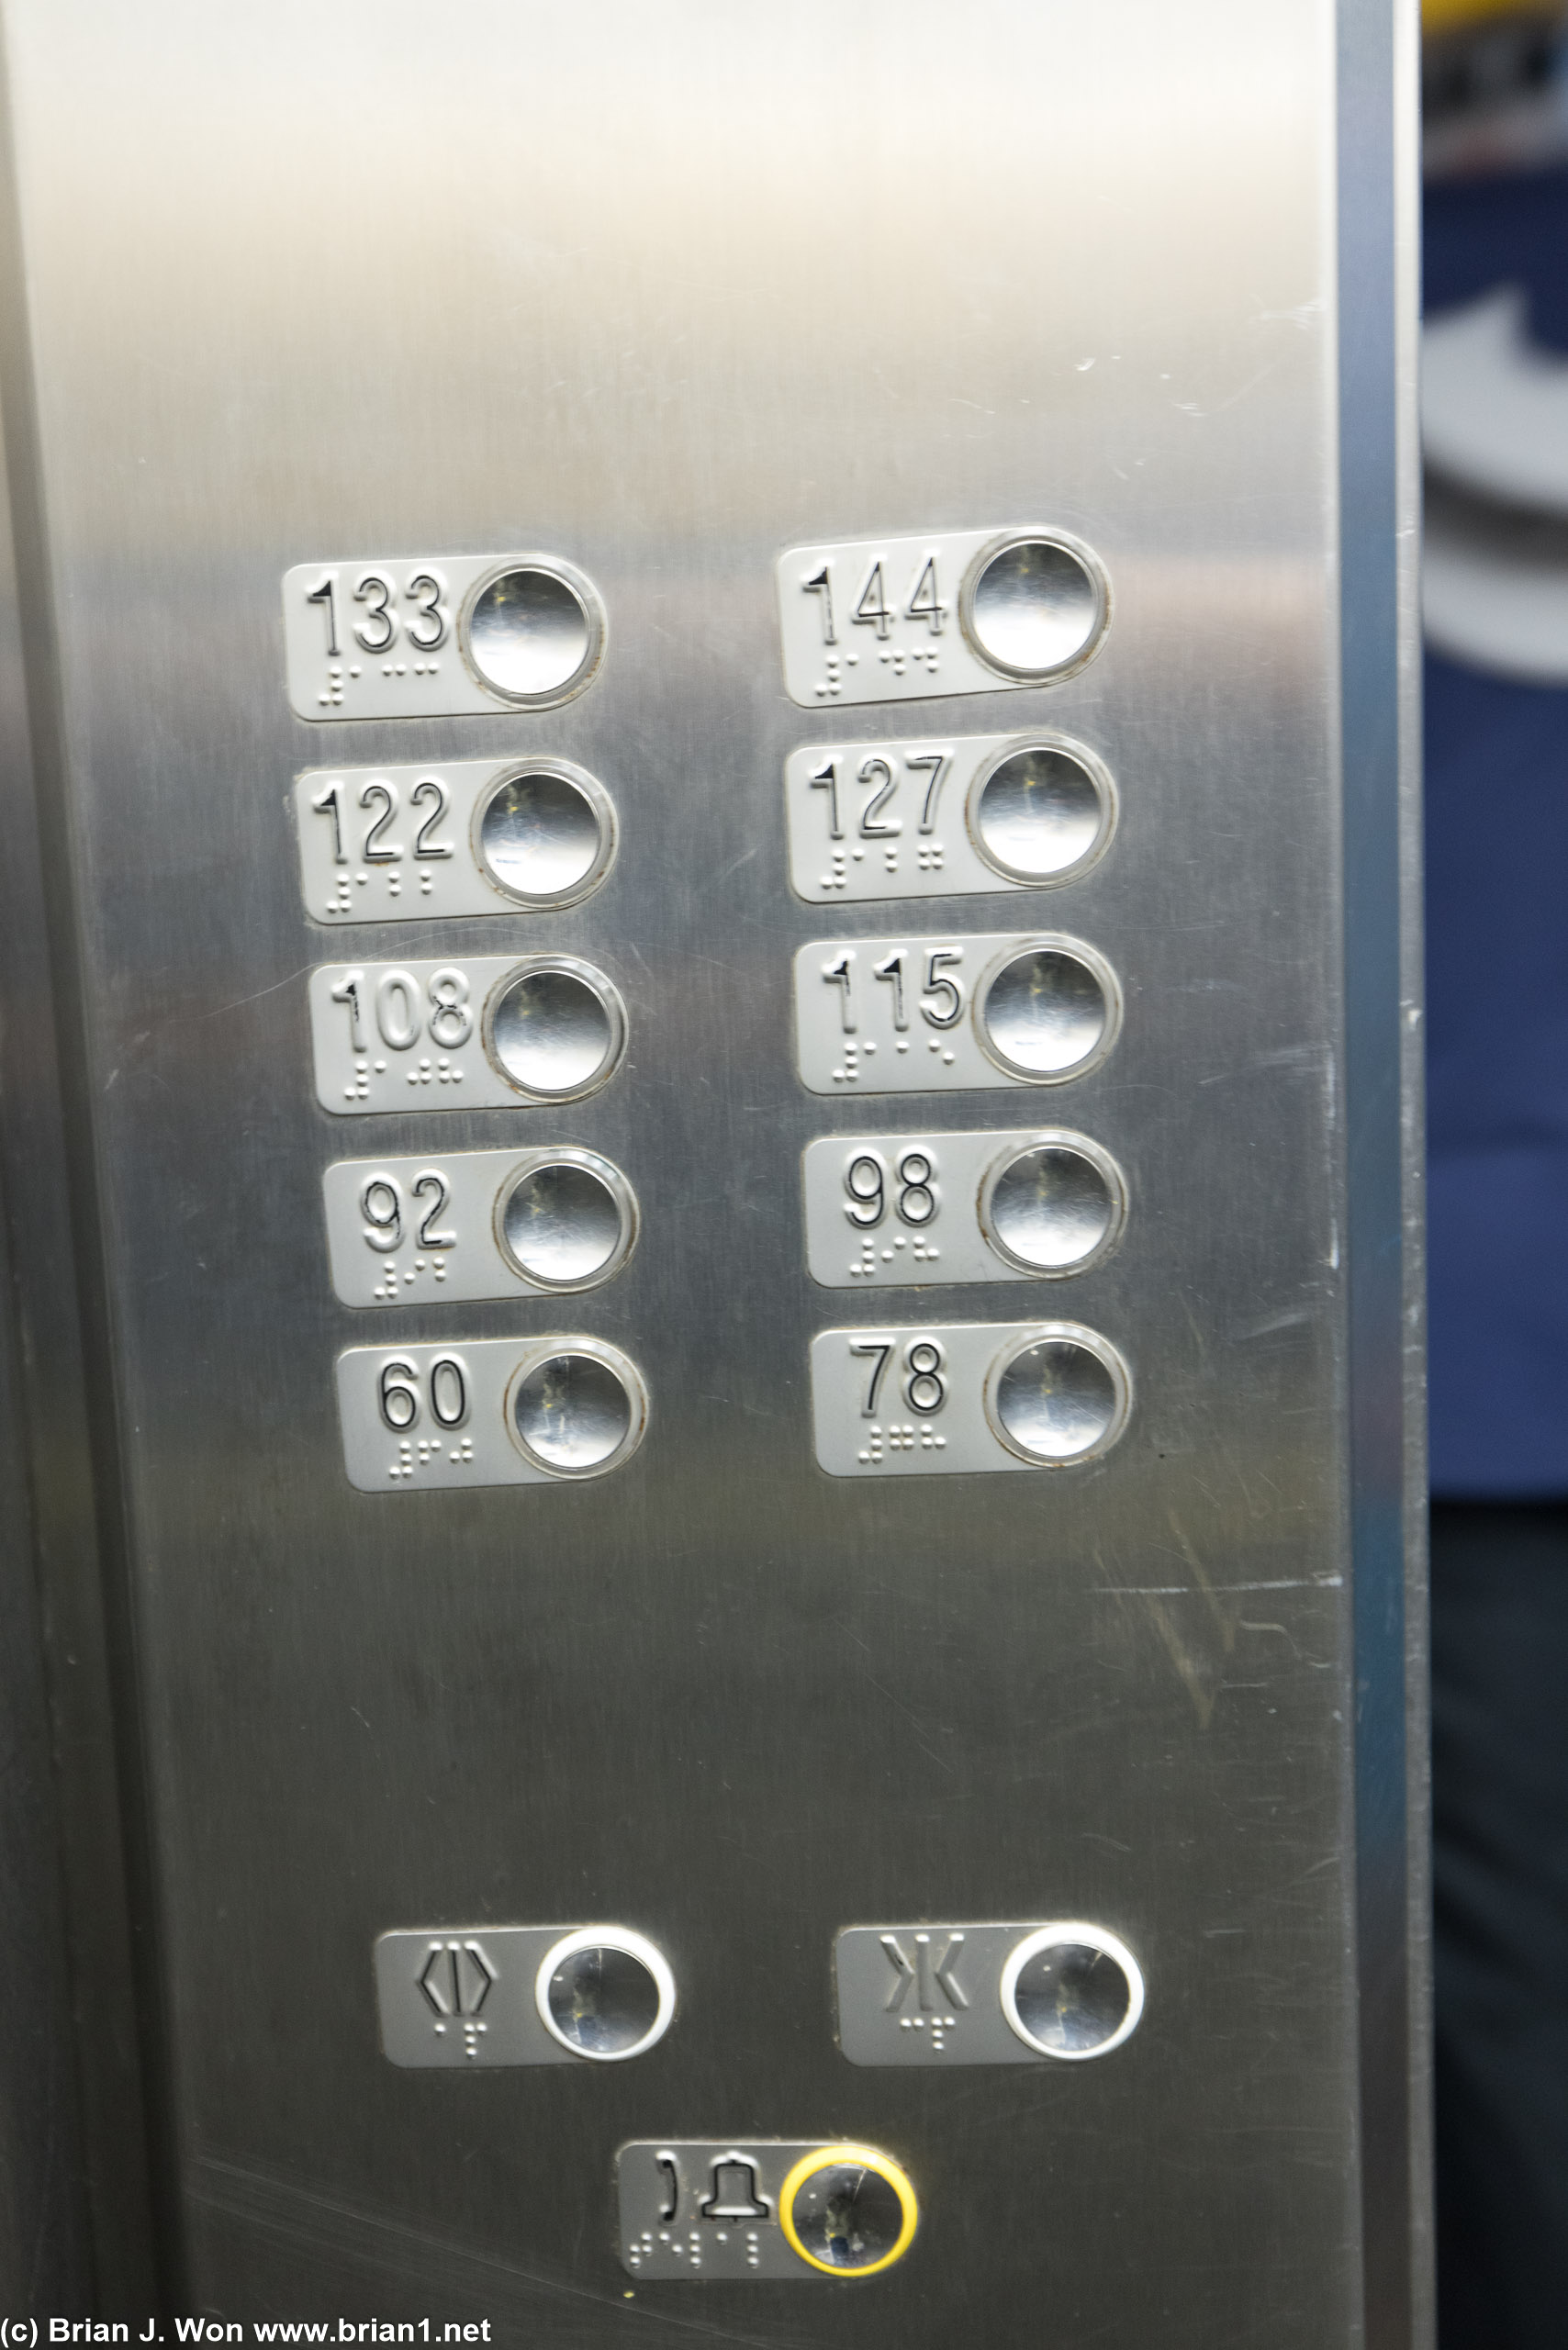 Elevators in power stations are marked in meters, not floors.